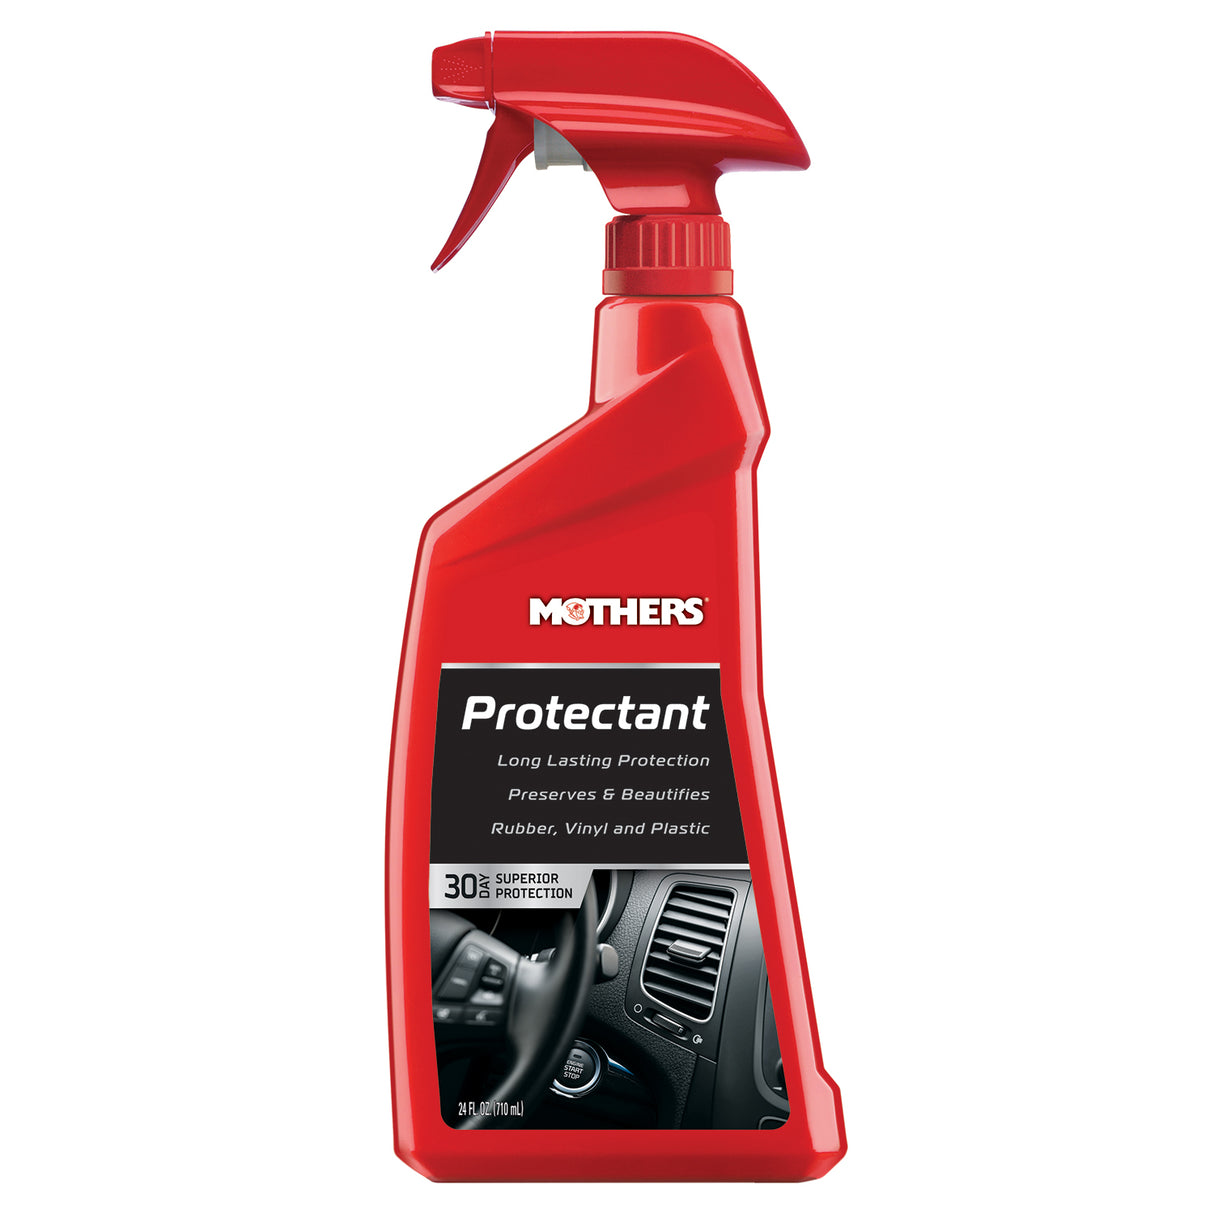 Mothers 05324 Protectant- Long lasting Protection - 24 oz